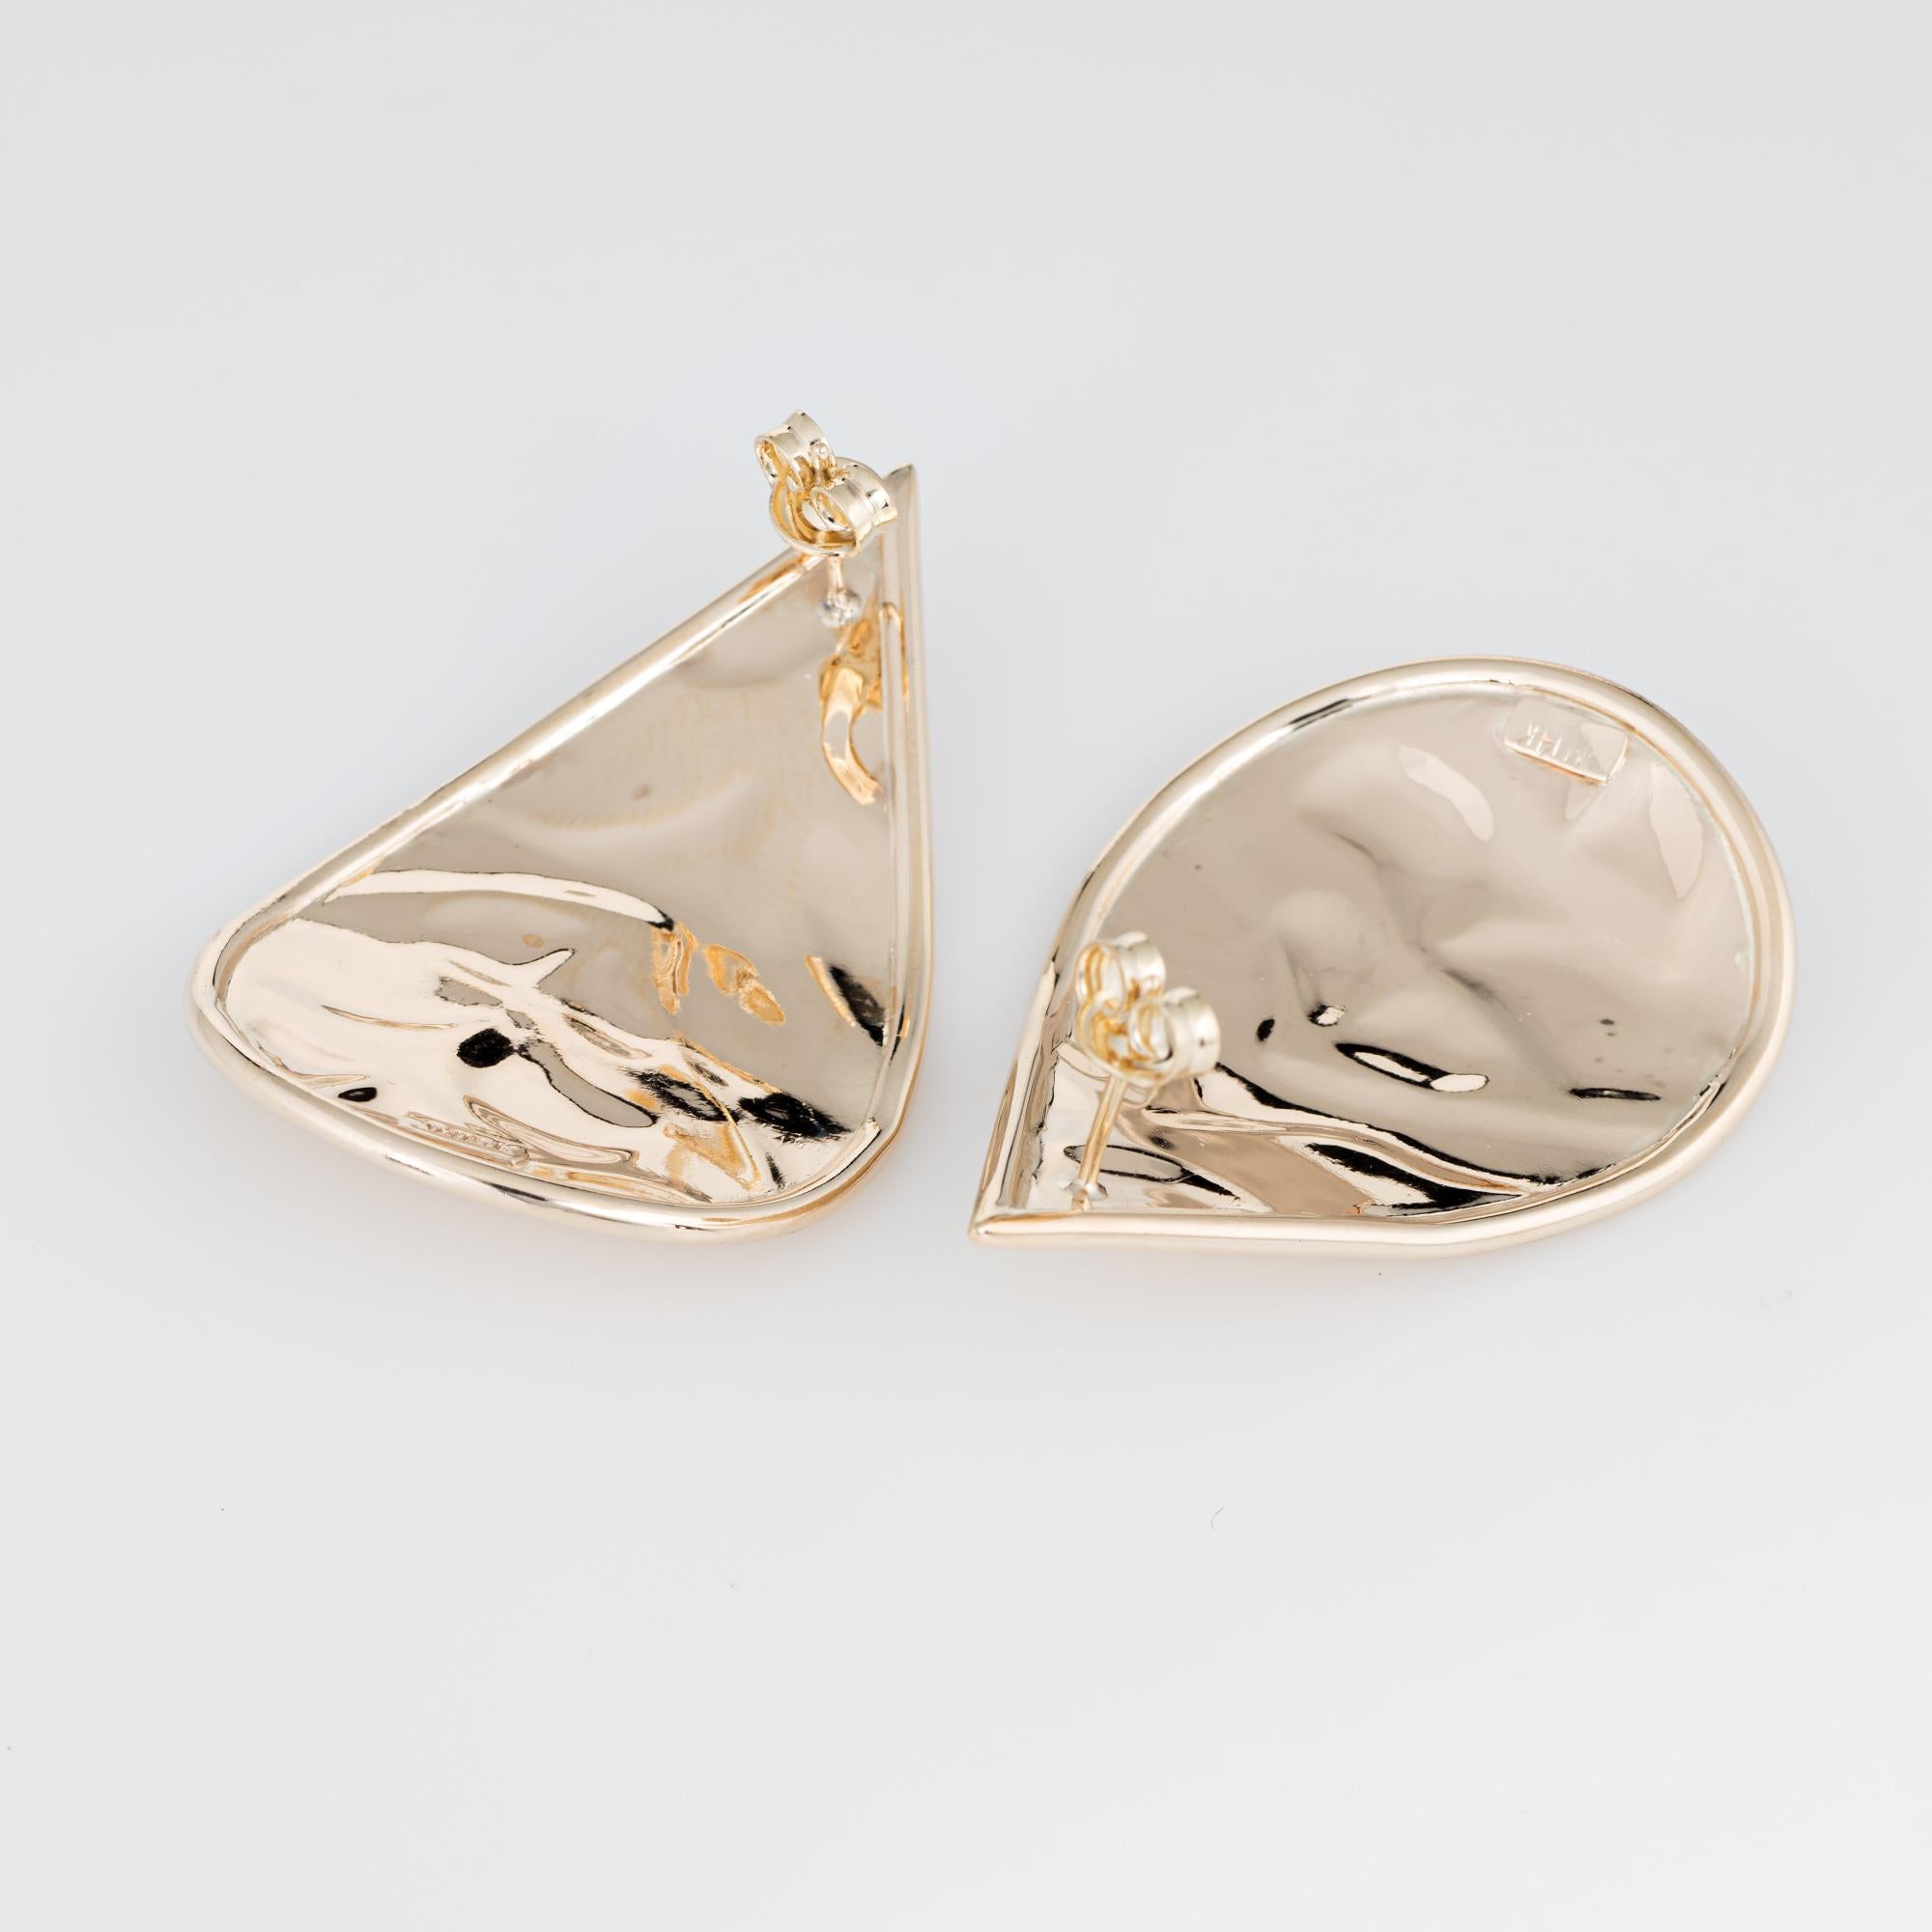 Elegant pair of vintage earrings crafted in 14k yellow gold. 

The large stylish earrings feature a textured design within the pear shaped mounts. Ideal for day or evening wear. The earrings are fitted with post and butterfly backings for pierced